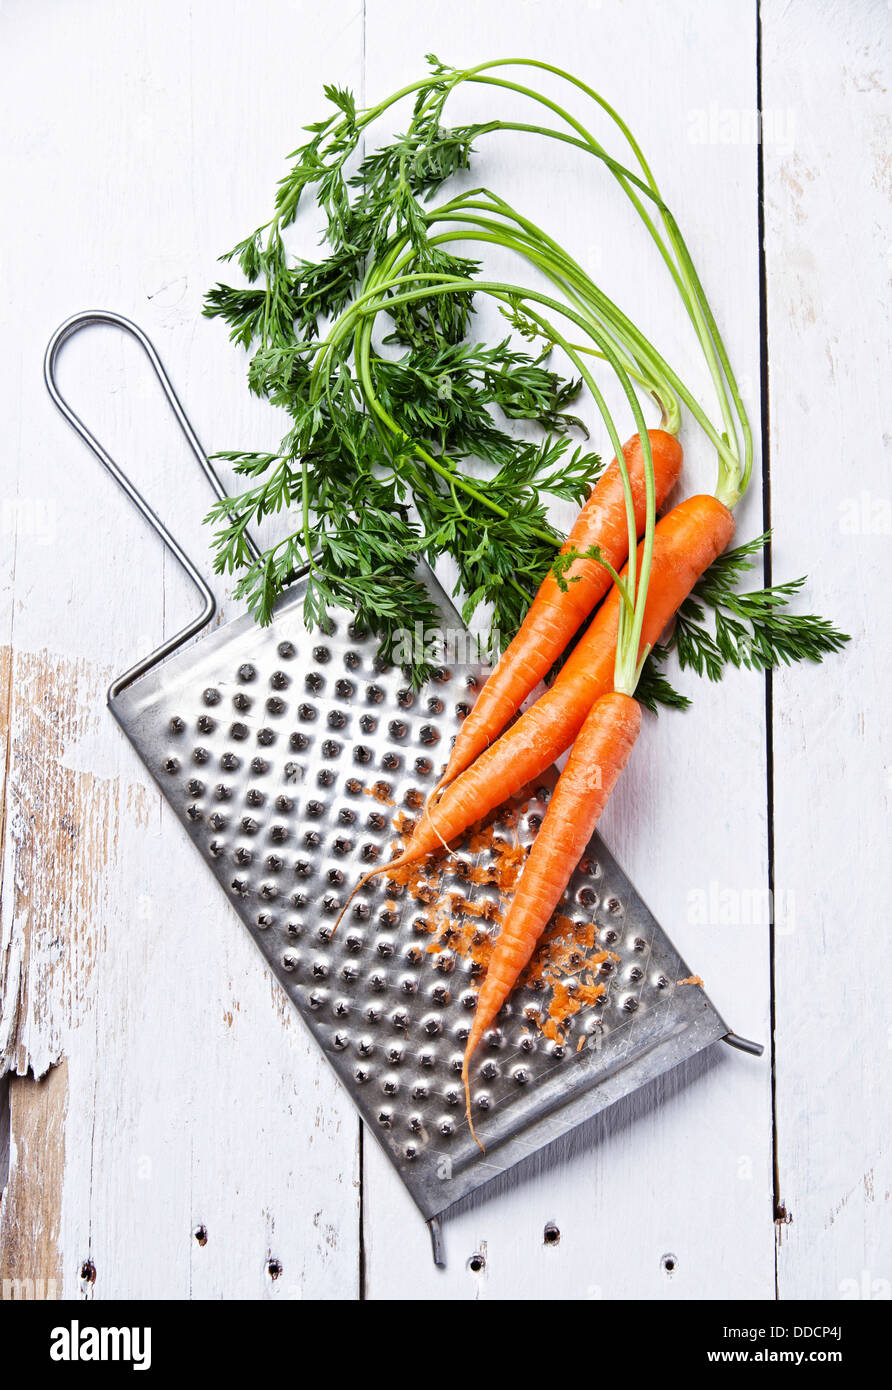 Fresh carrots with grater on white wooden background Stock Photo